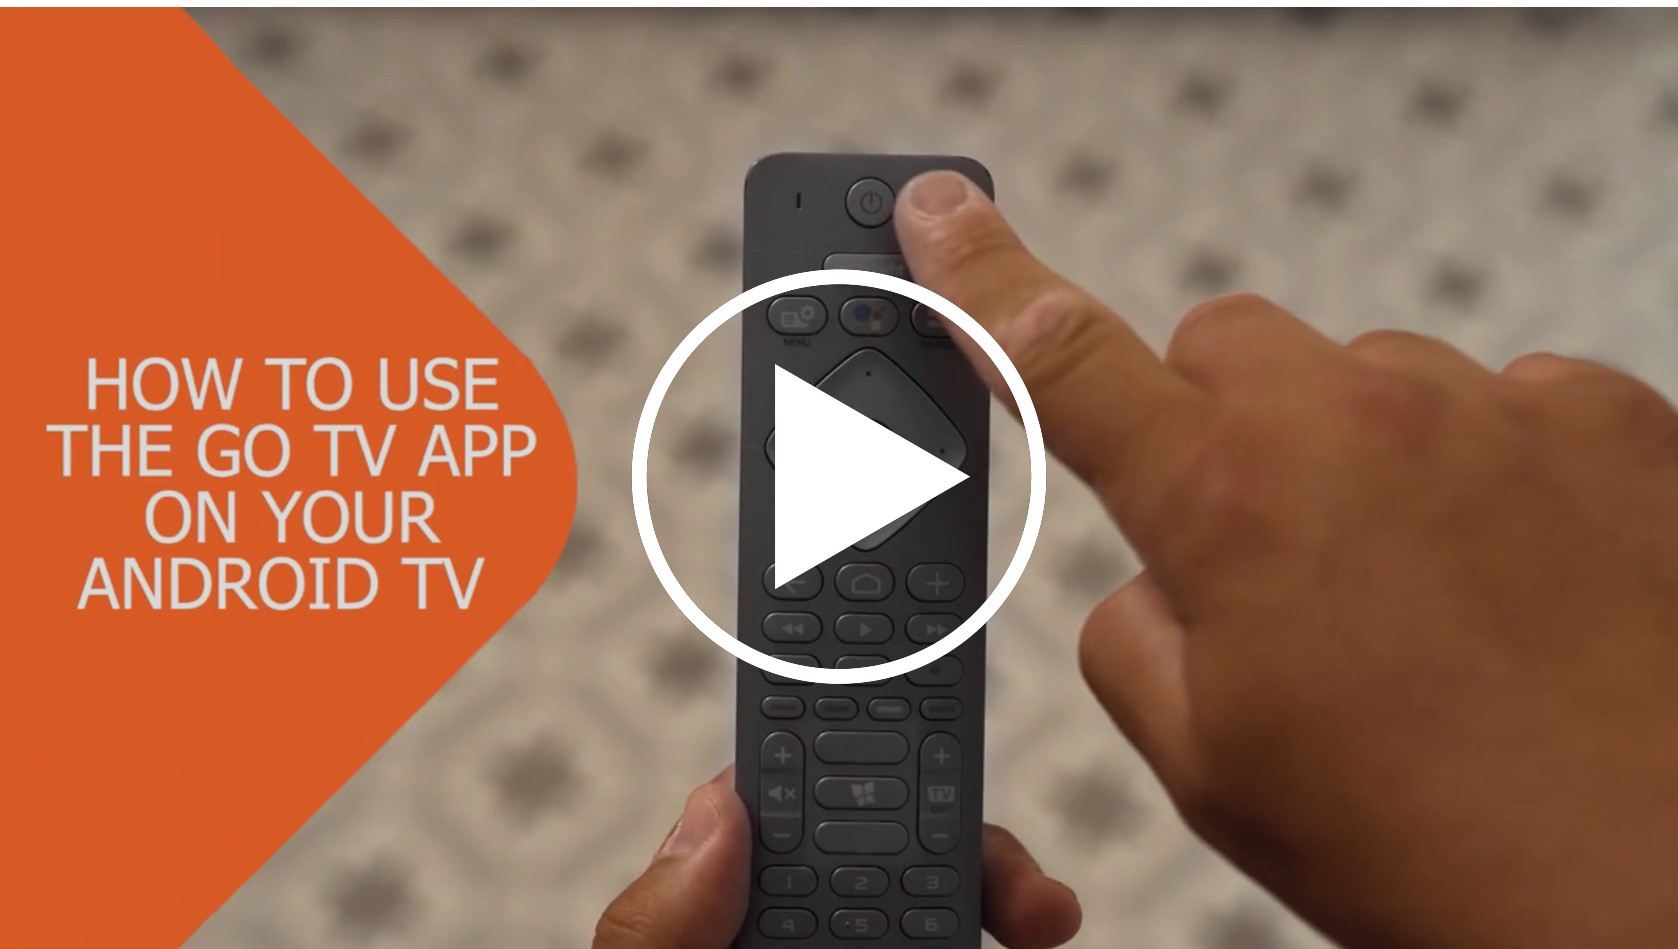 How To Use The GO TV App On Your Android TV